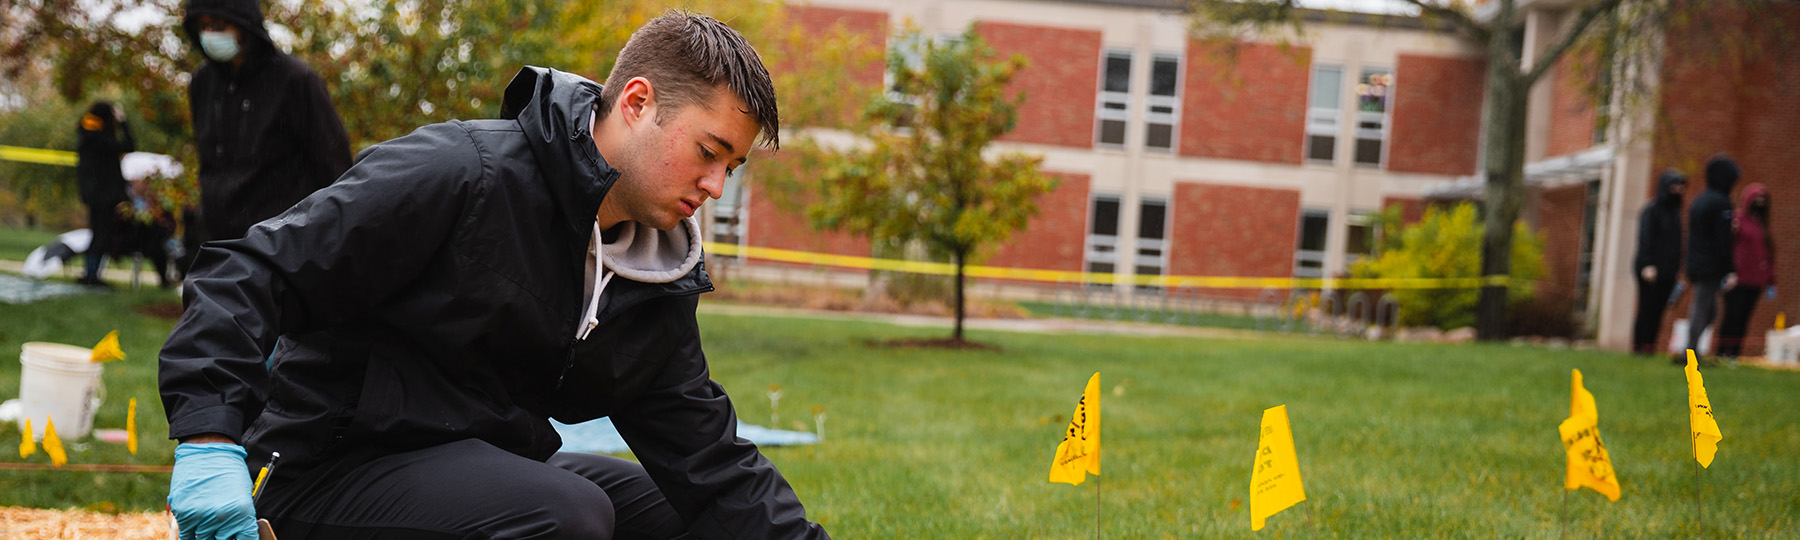 A student wearing a black coat and rubber gloves examines evidence next to yellow flags marking a mock crime scene outside of Anspach Hall.